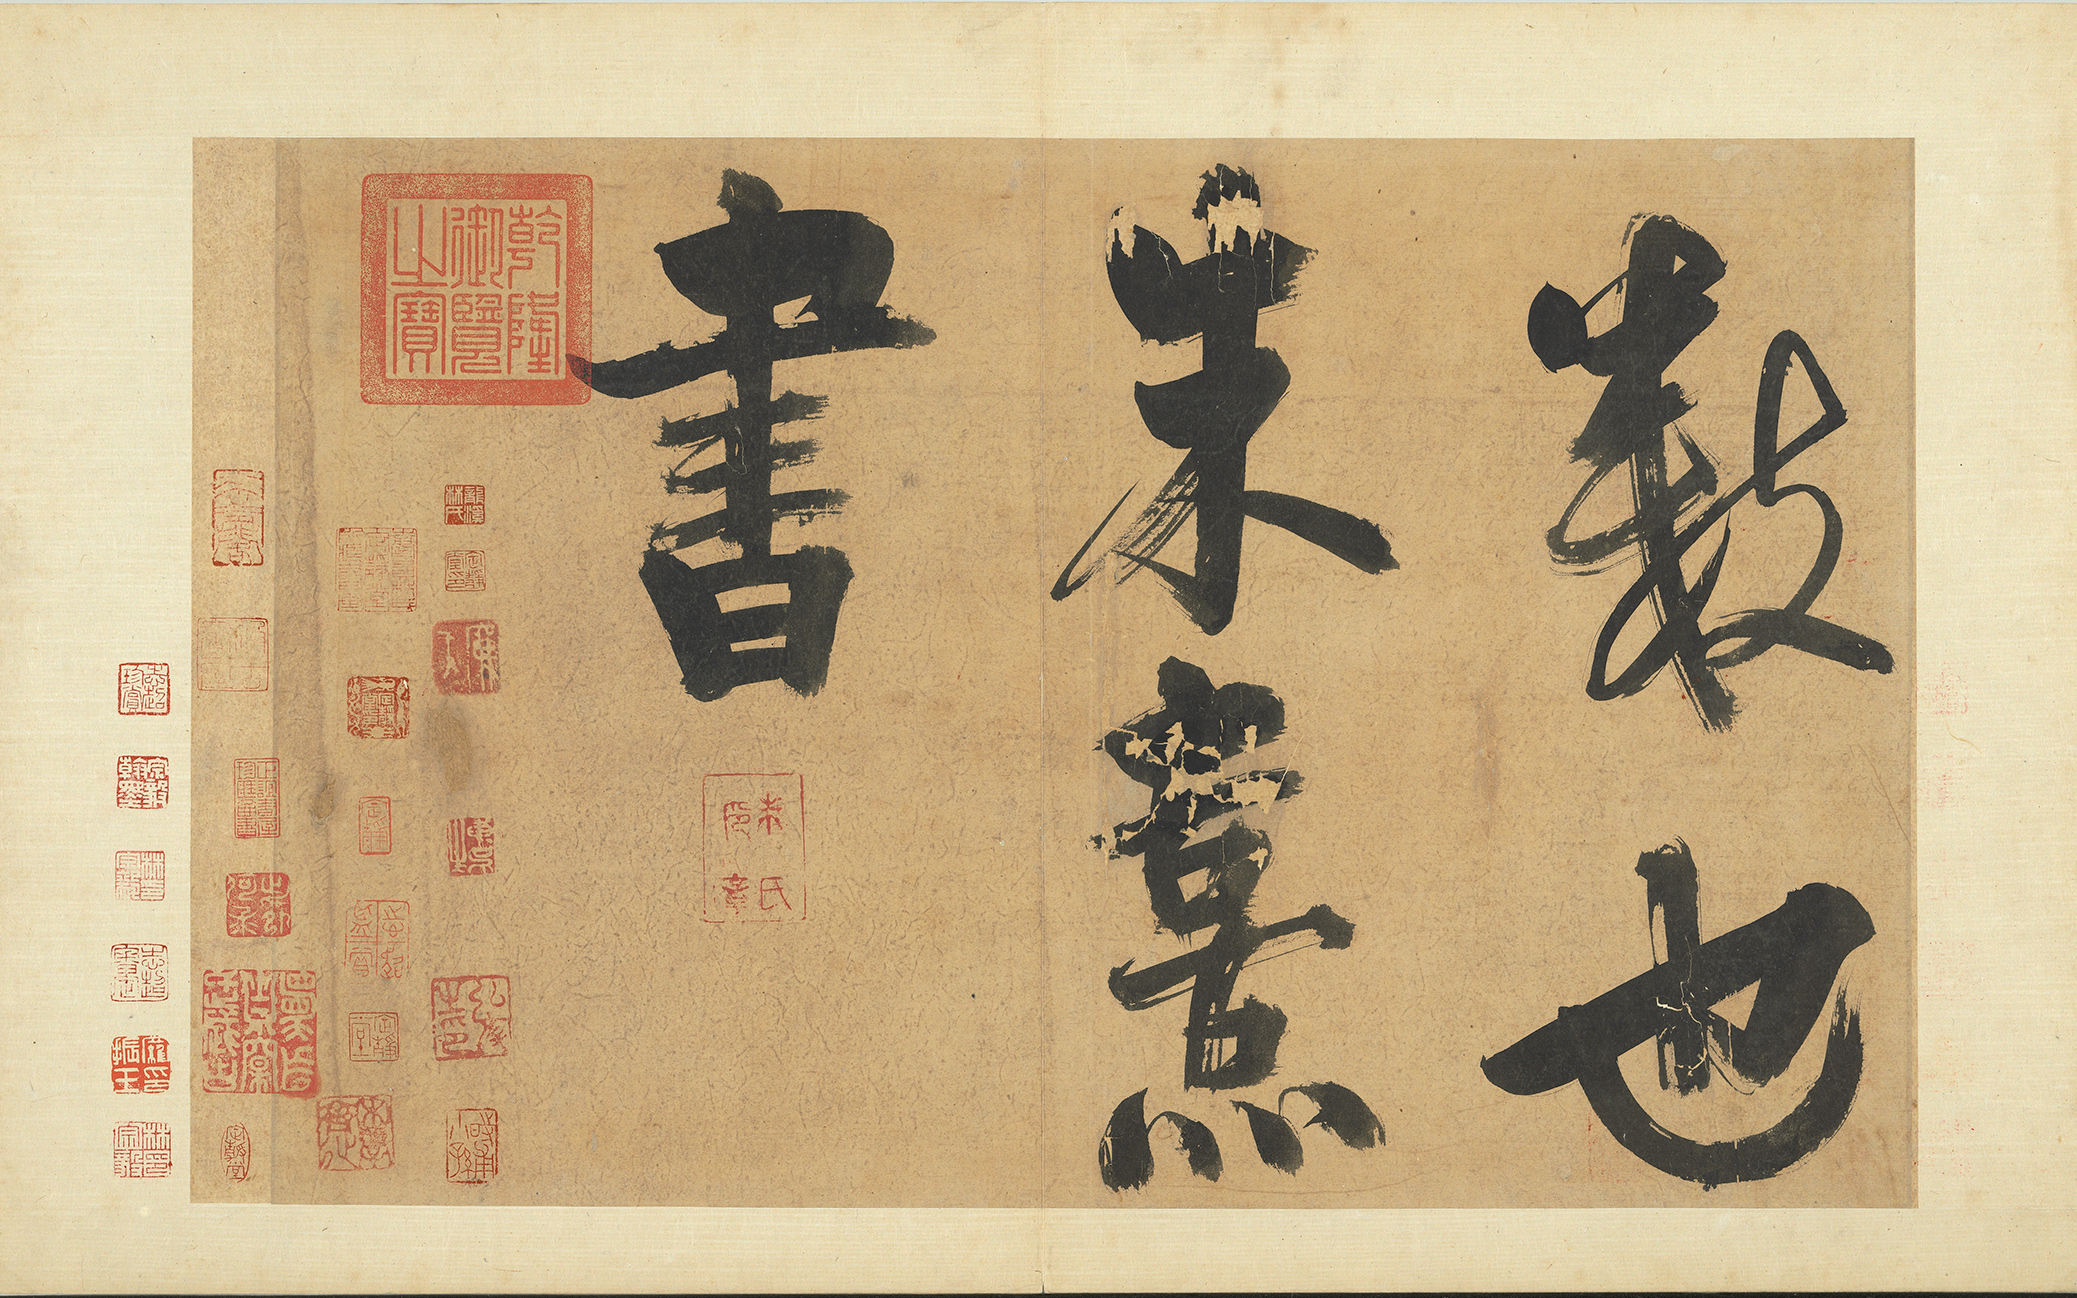 Calligraphy in National Palace Museum, Song dynasty